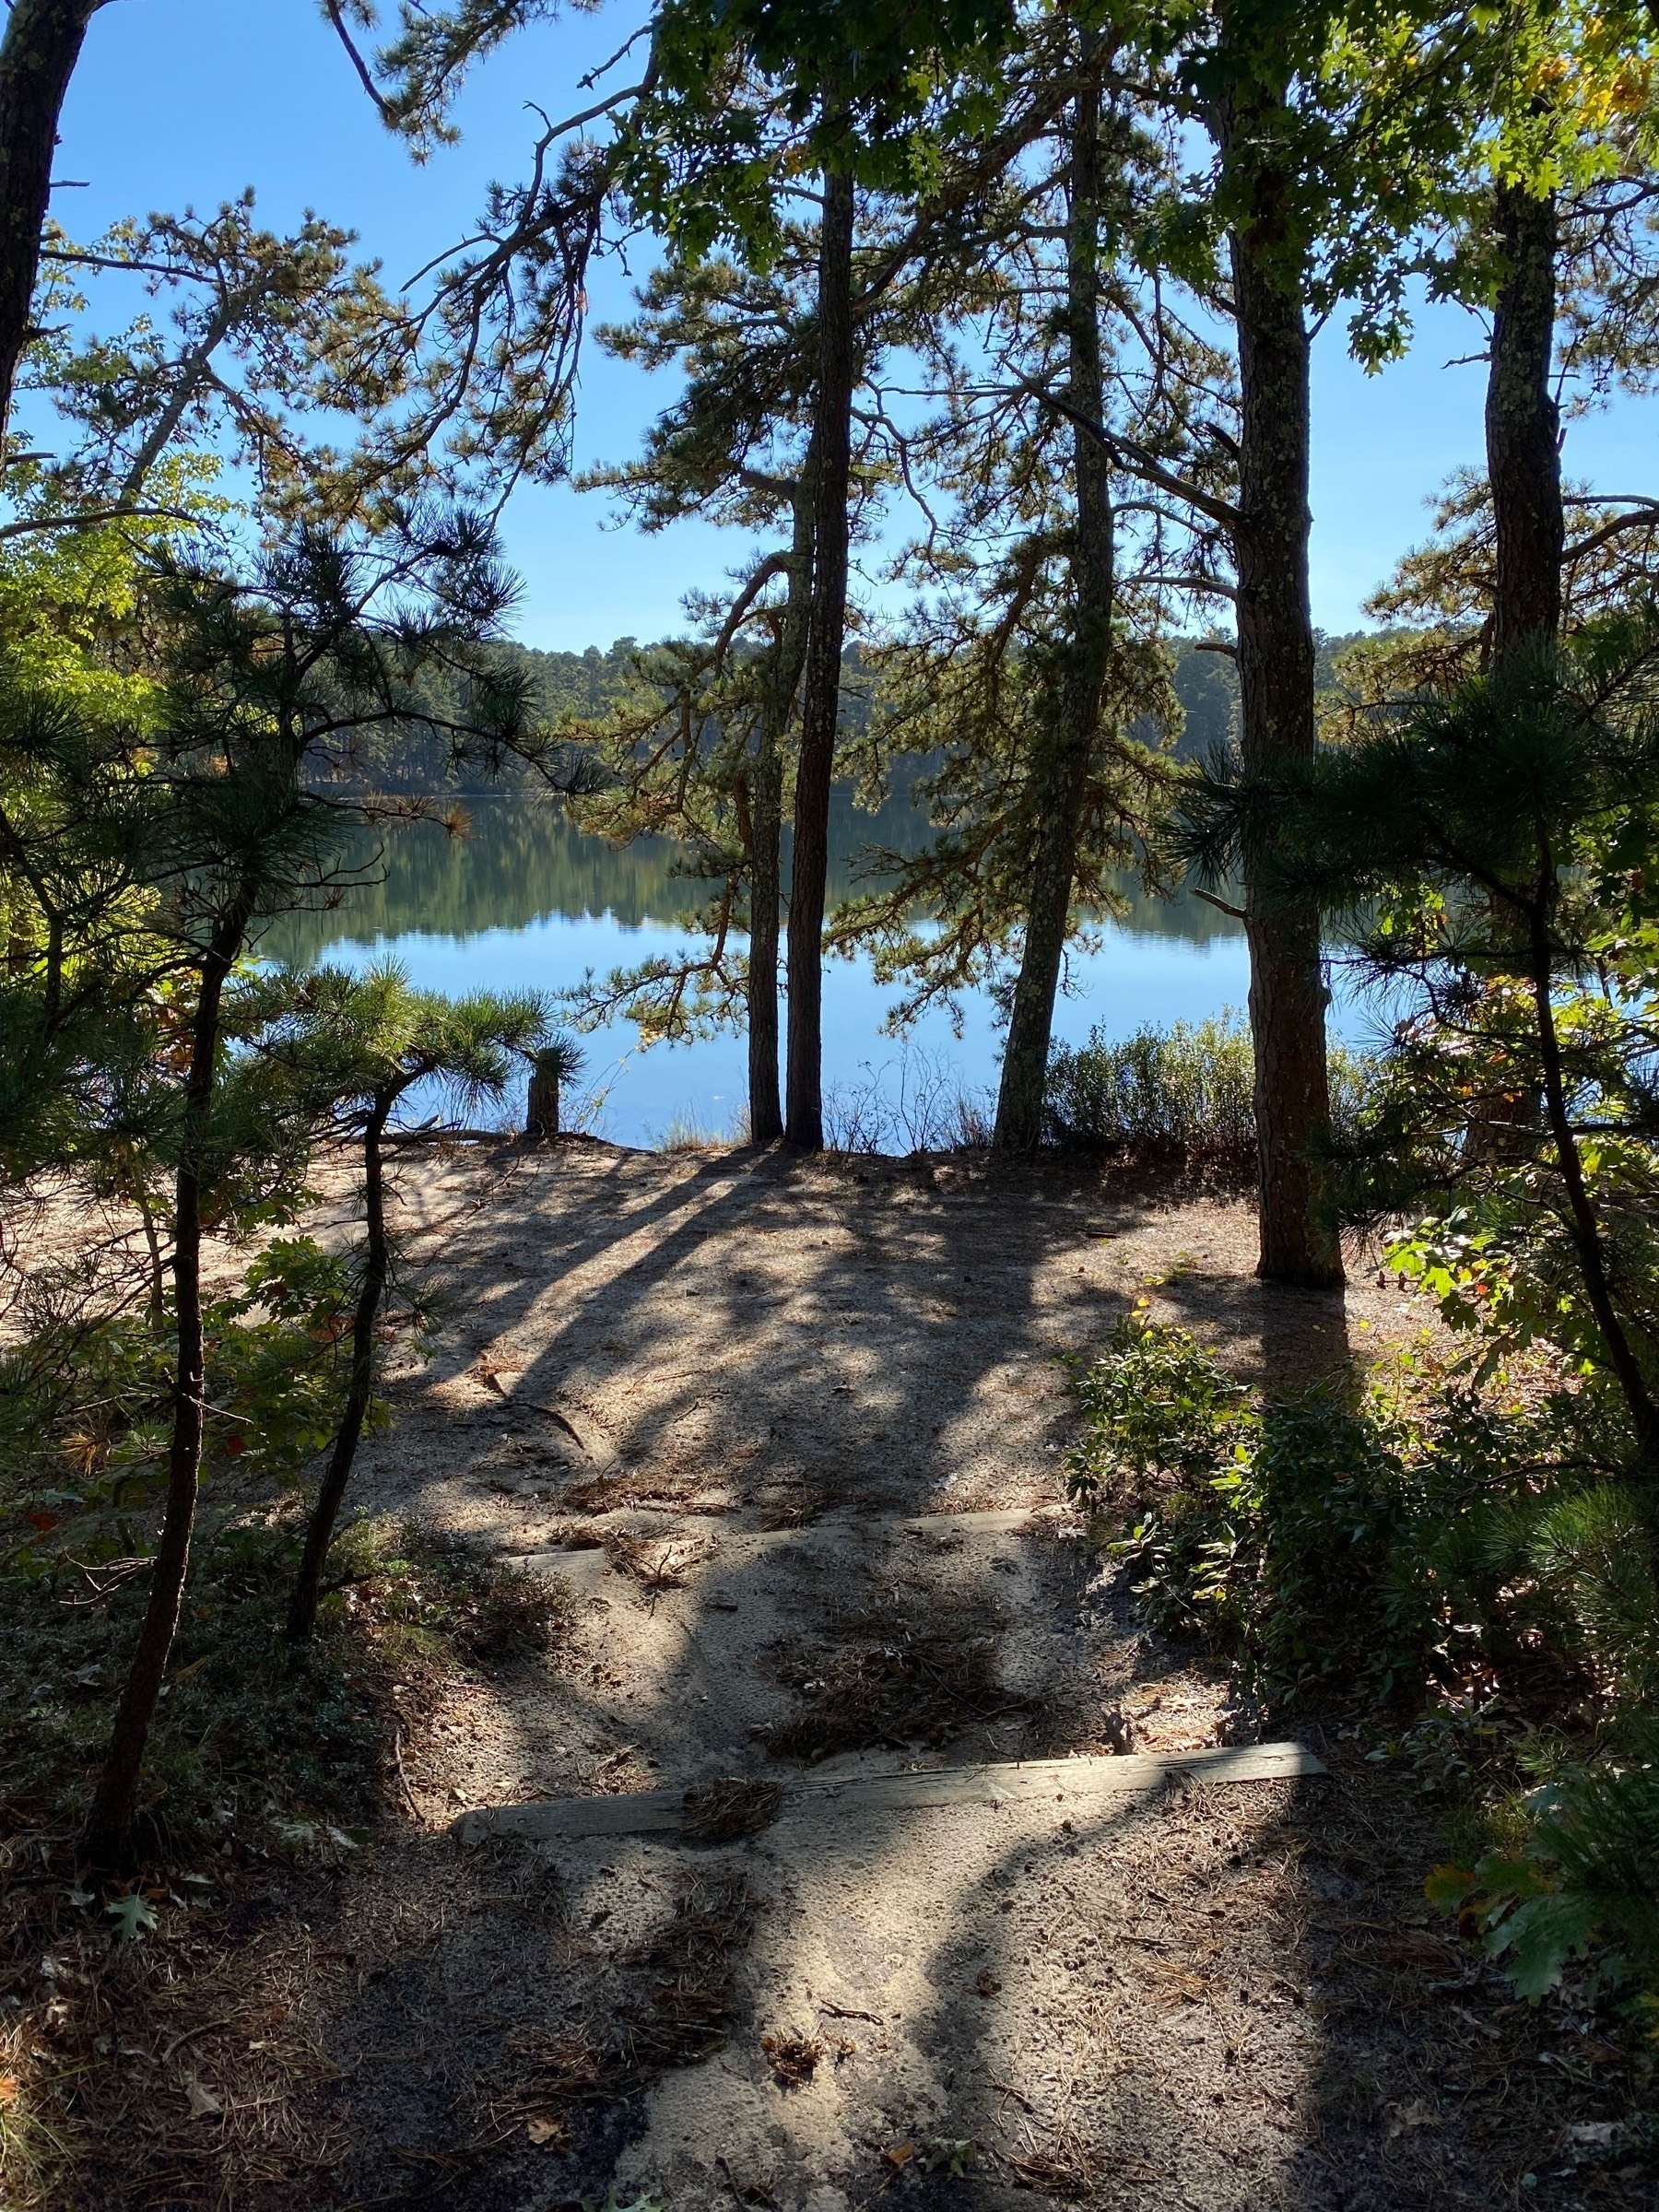 View of a pond with pine trees on the near bank casting shadows on the ground.